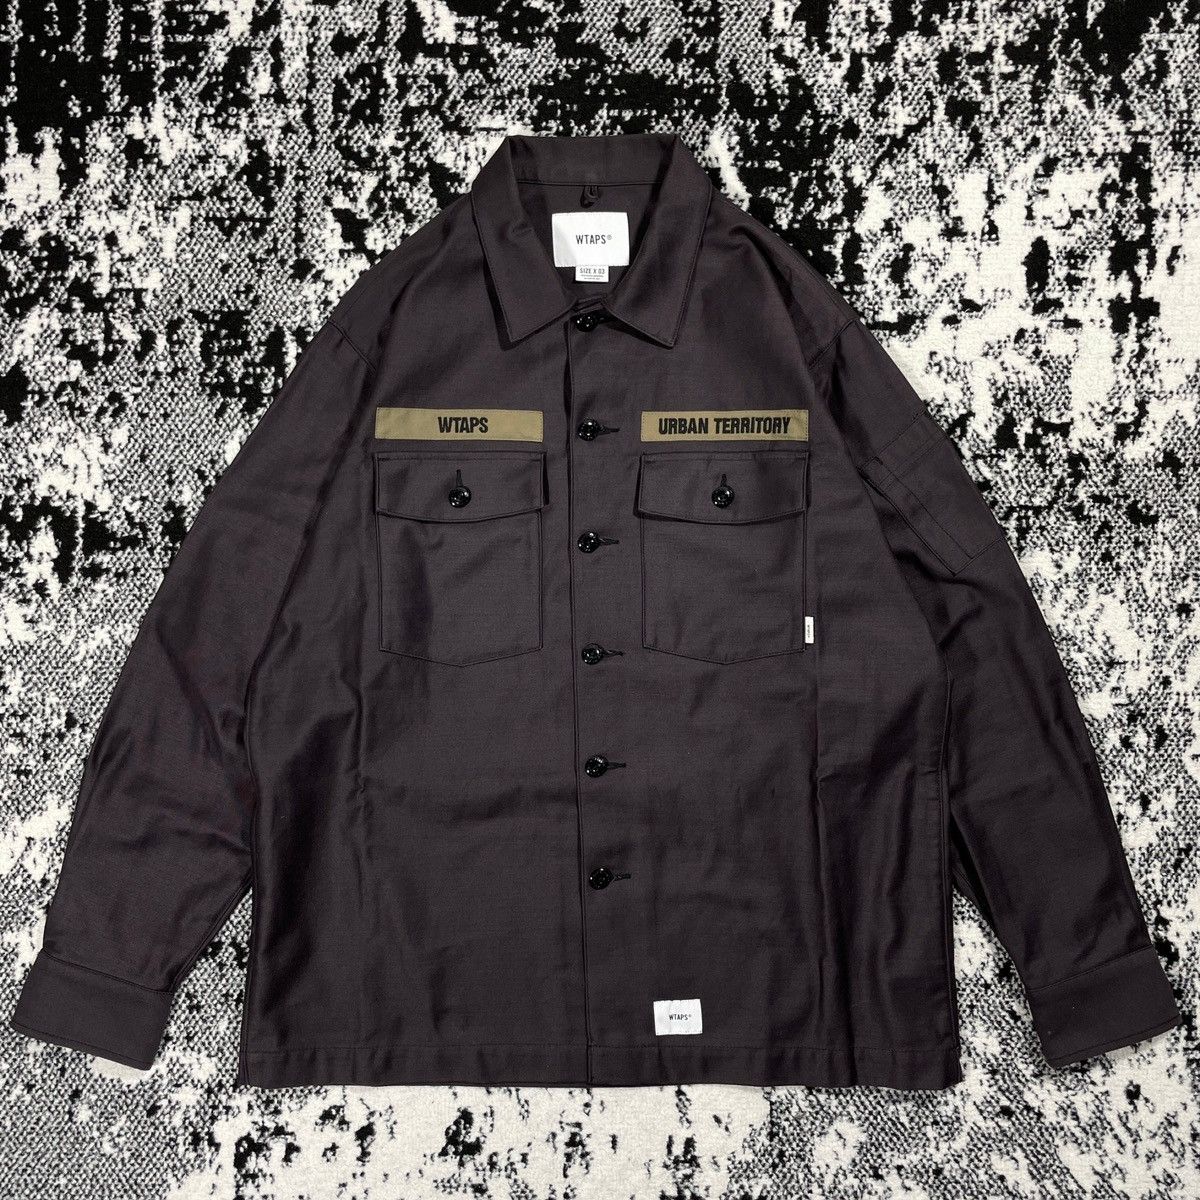 Wtaps WTAPS BUDS LS/ COTTON SATIN 20AW EX41_COLLECTION | Grailed